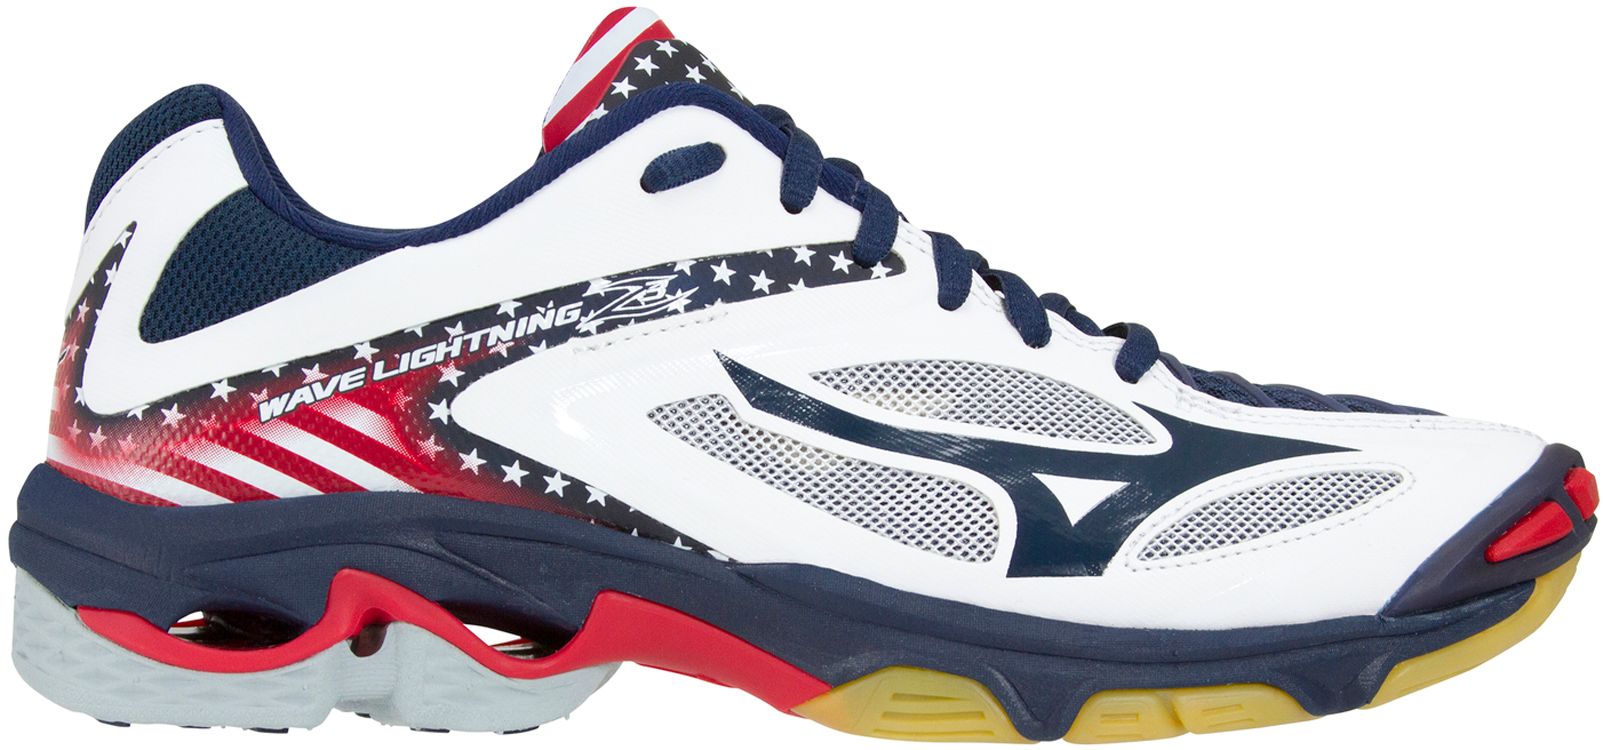 red white and blue volleyball shoes